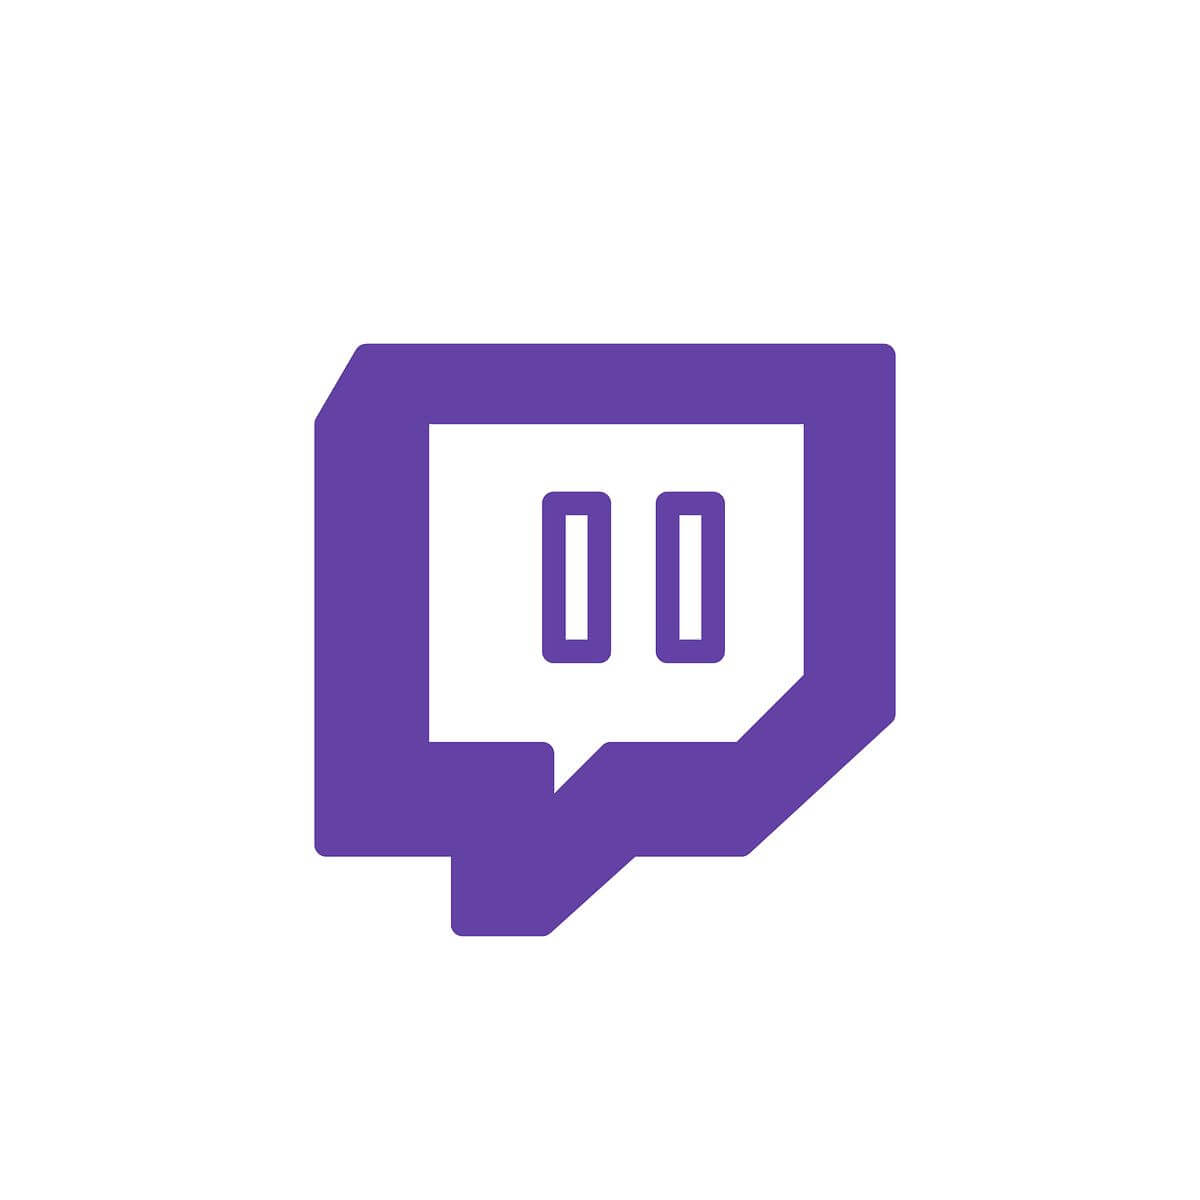 popular streaming software for twitch